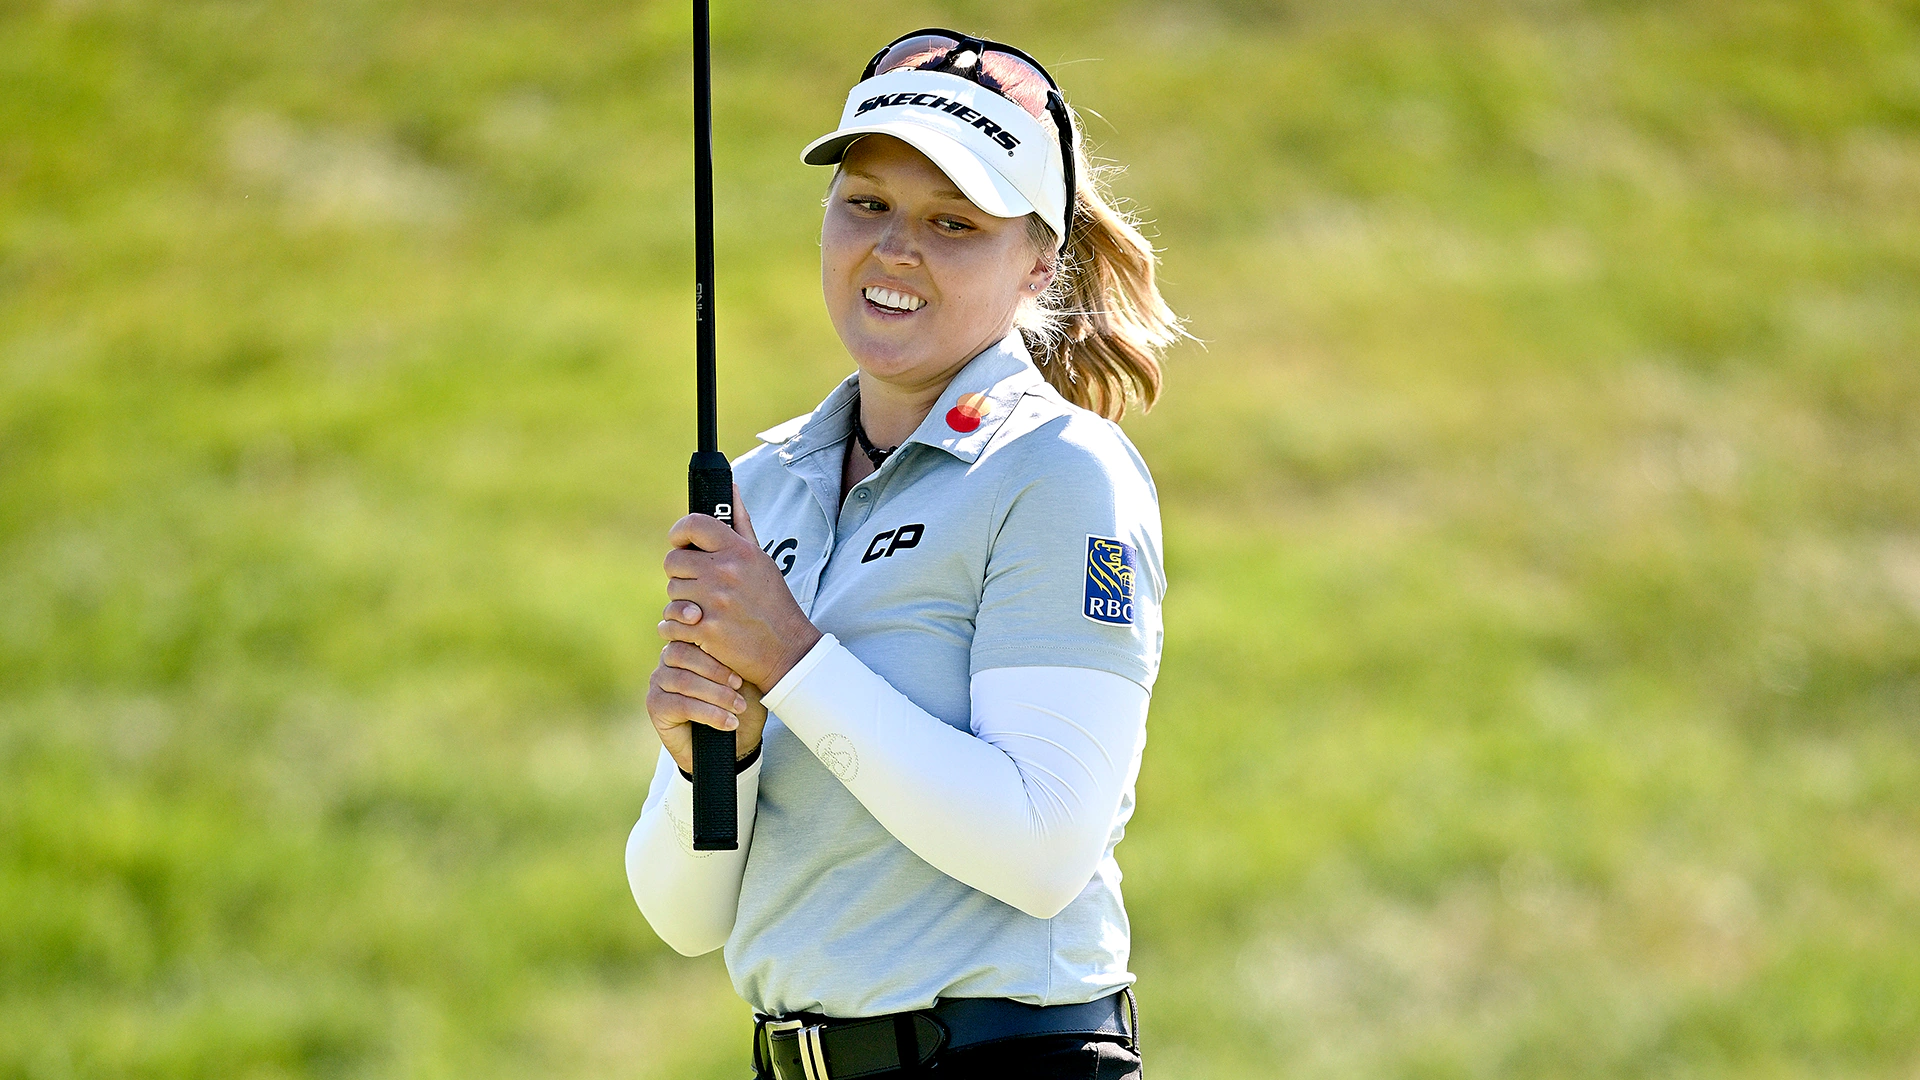 With left hand low, Brooke Henderson puts both hands on Evian trophy